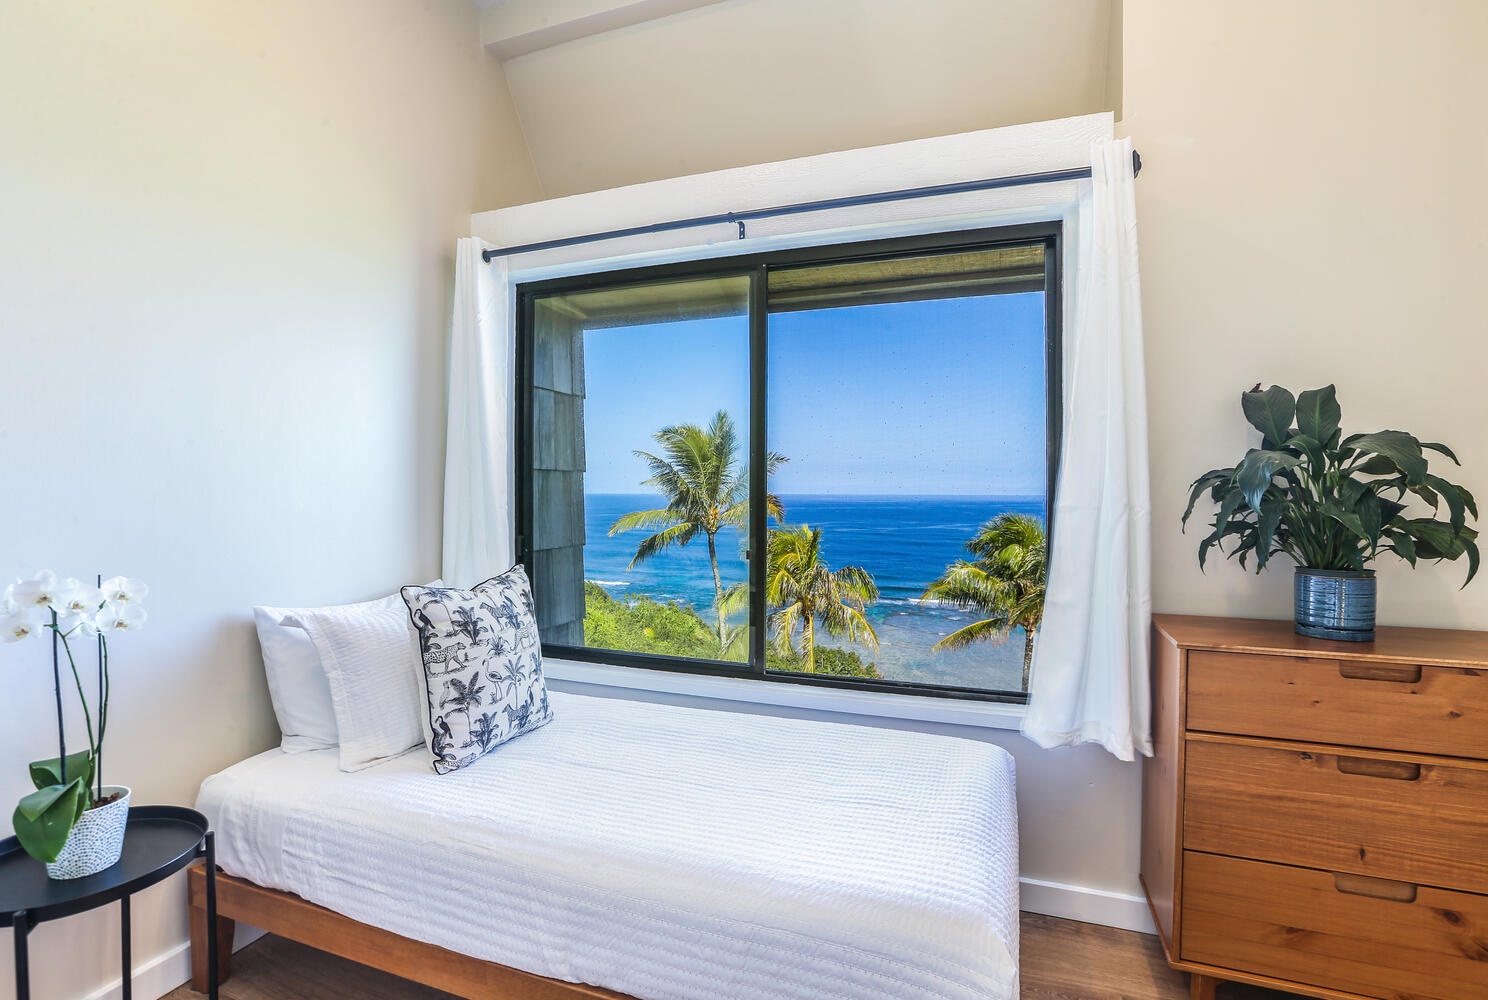 Princeville Vacation Rentals, Sealodge J8 - Watch the waves roll in from the comfort of your bed